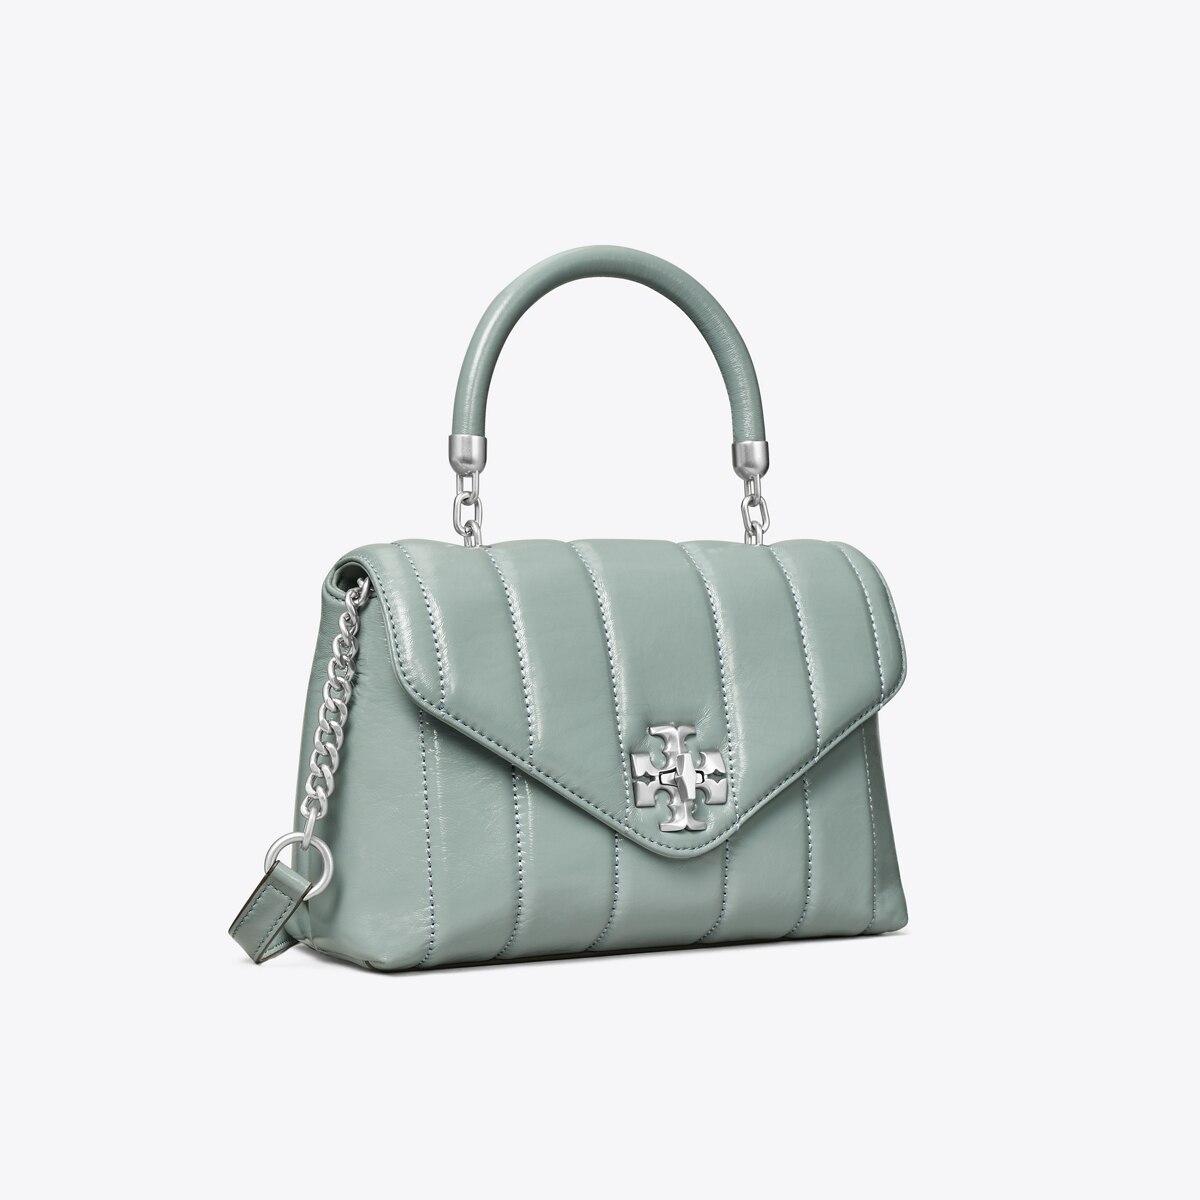 This Tory Burch Tote Is on Sale and Will Replace Our Old Work Bag